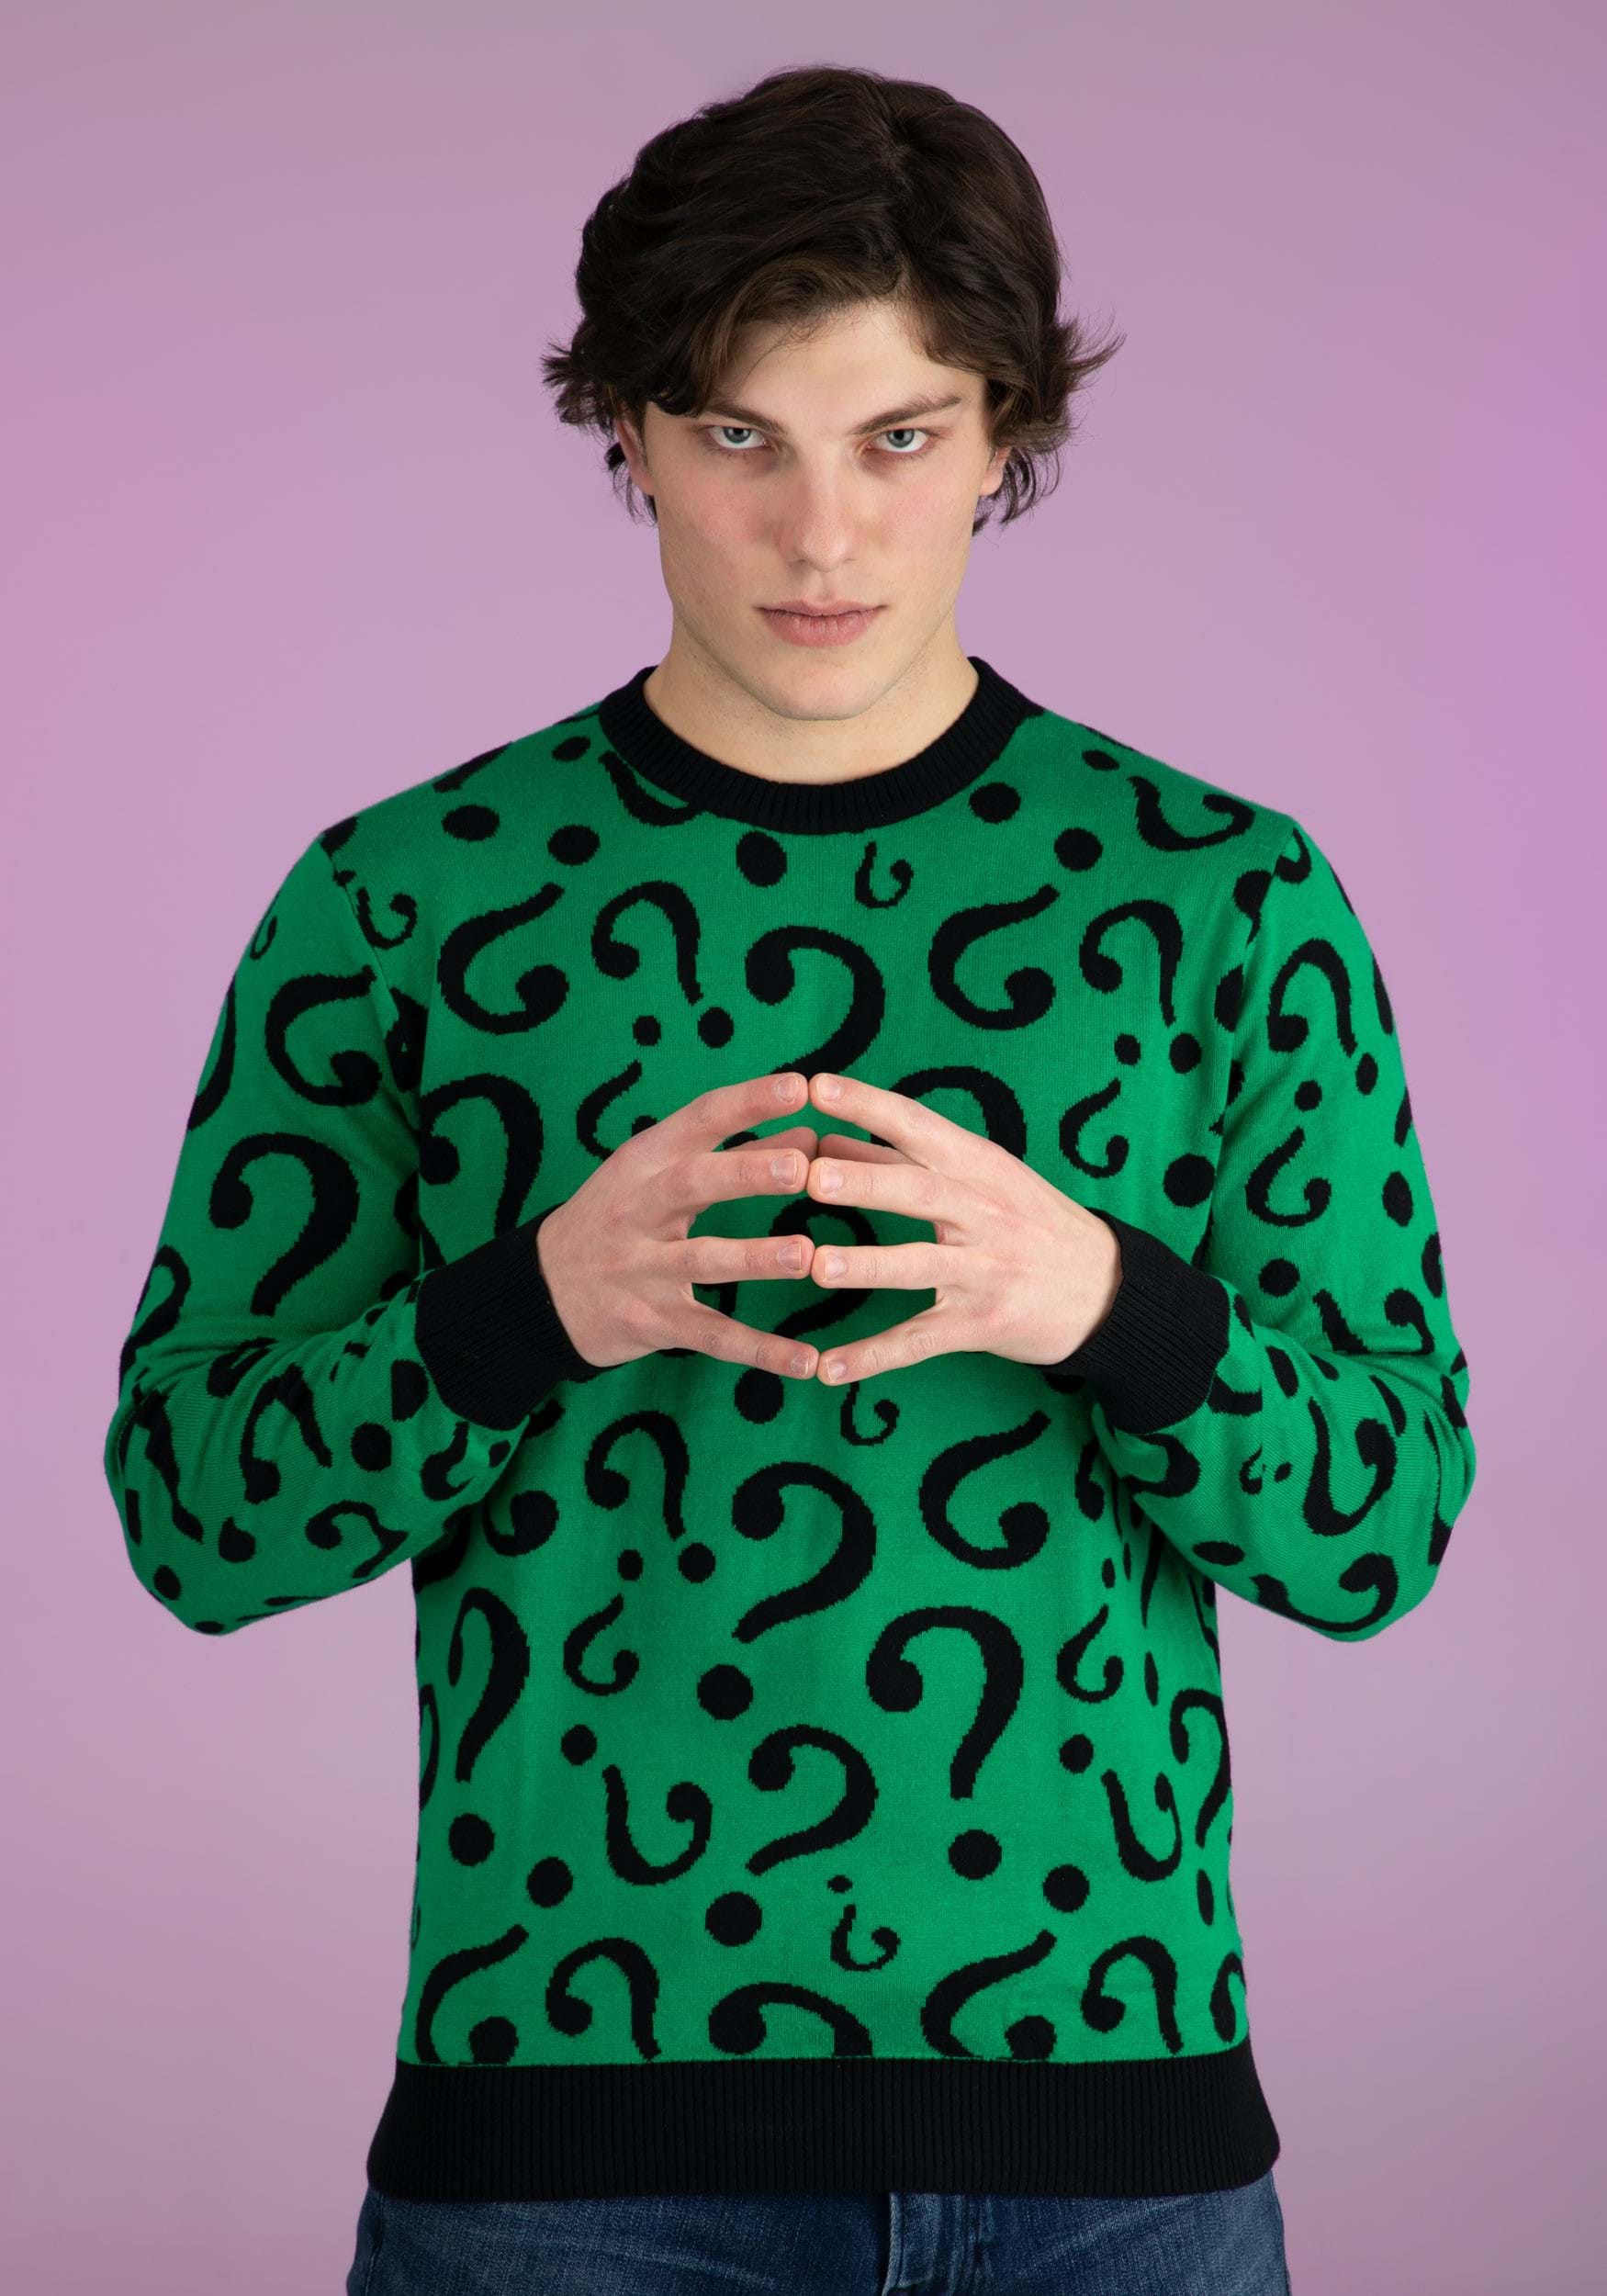 Adult The Riddler Christmas Sweater